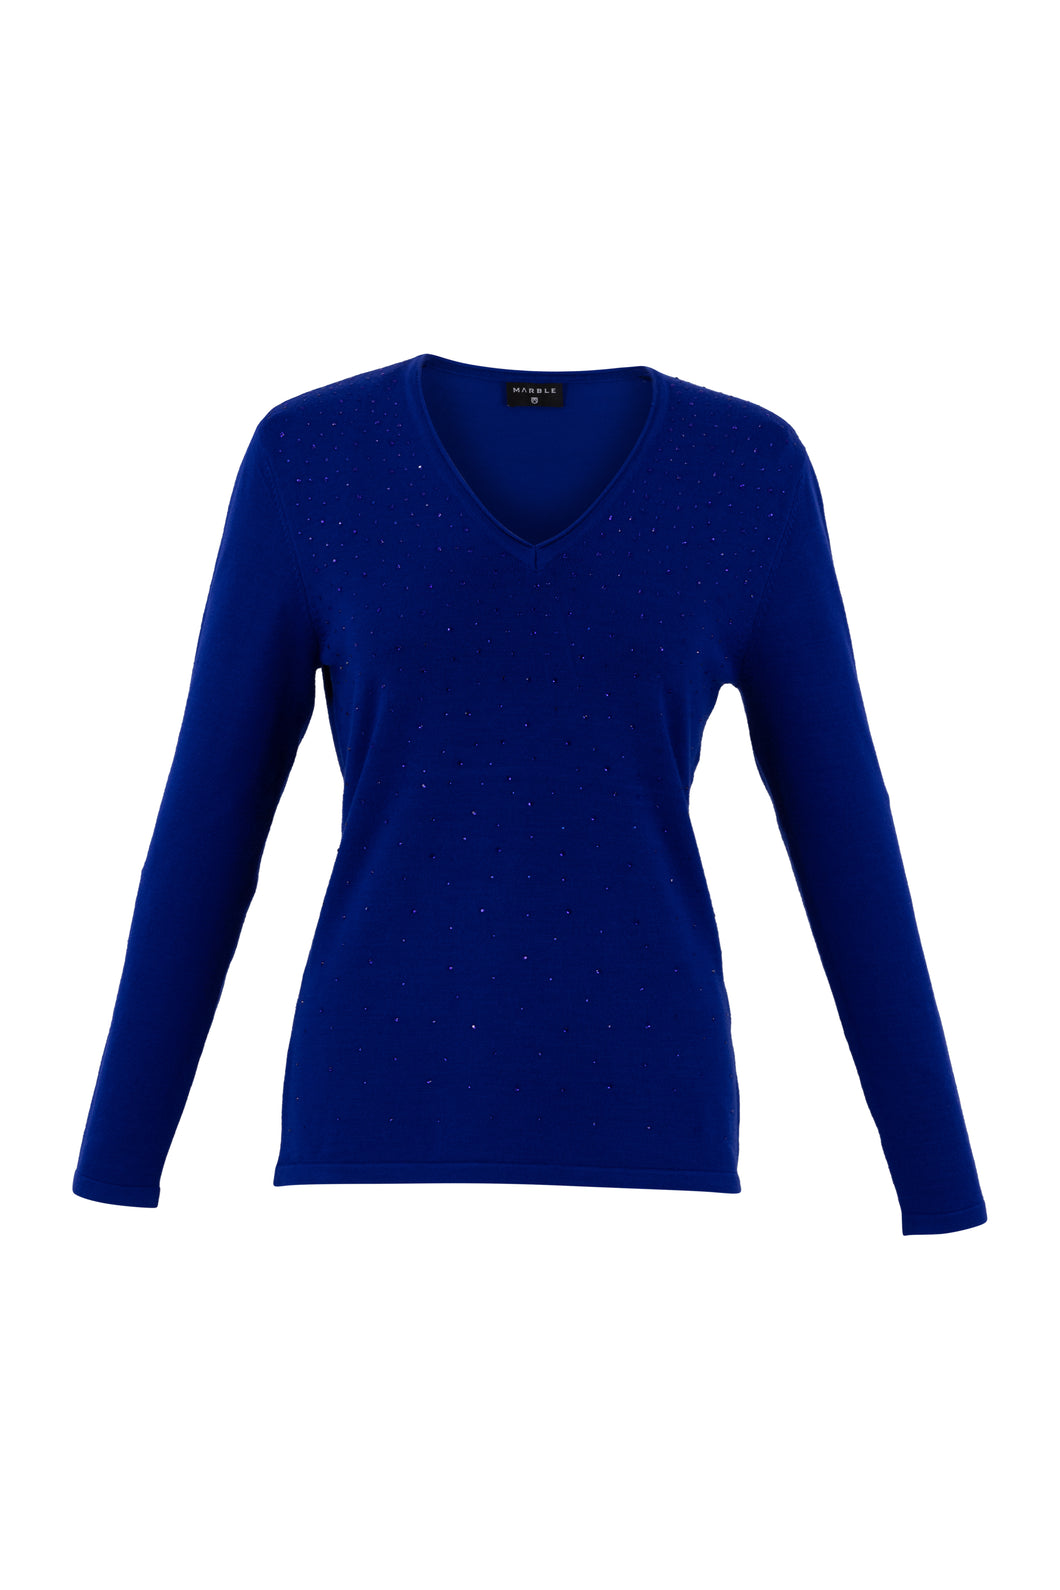 MARBLE FASHIONS 7119 SWEATER COLOUR 210 - ROYAL BLUE